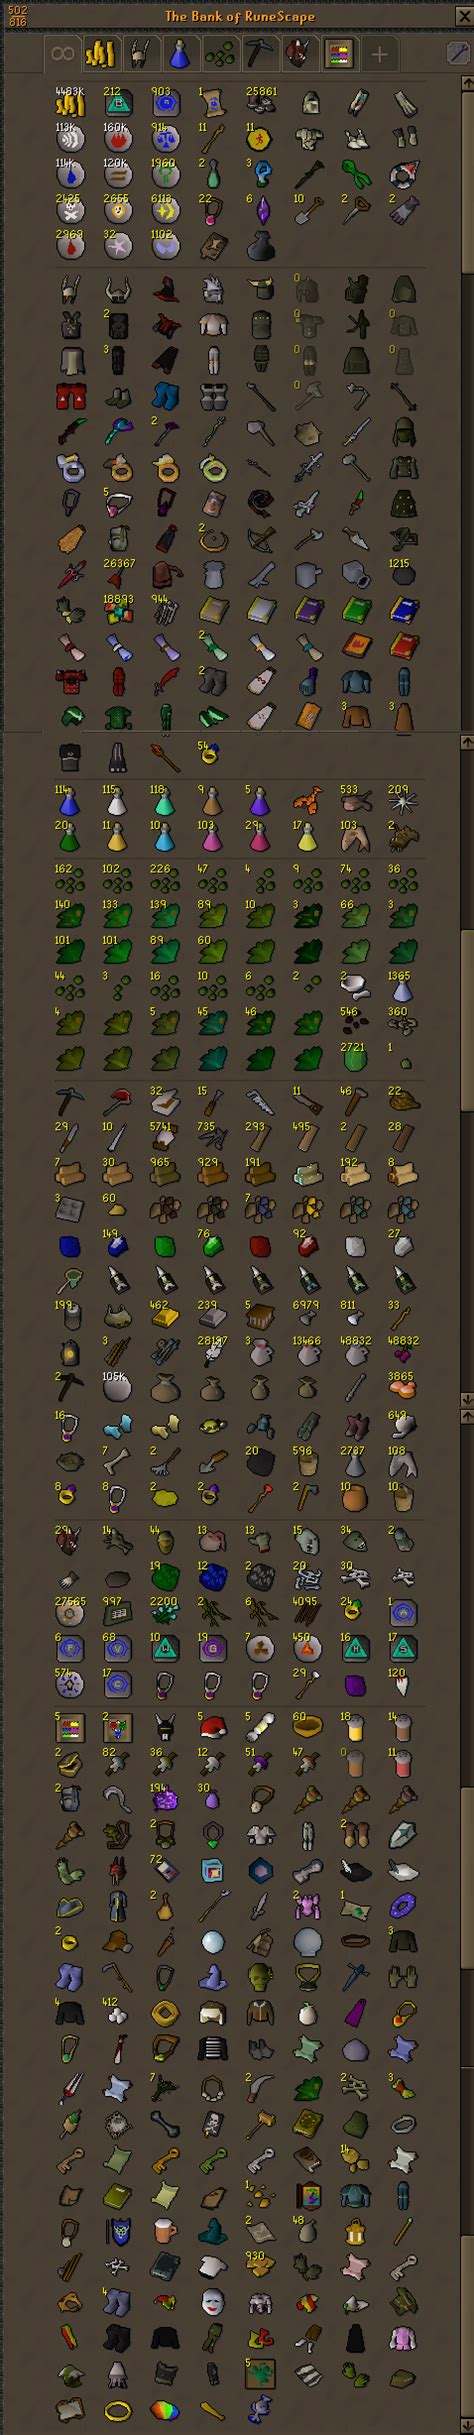 Osrs When You Reorganize And Clean Your Bank D Banktabs